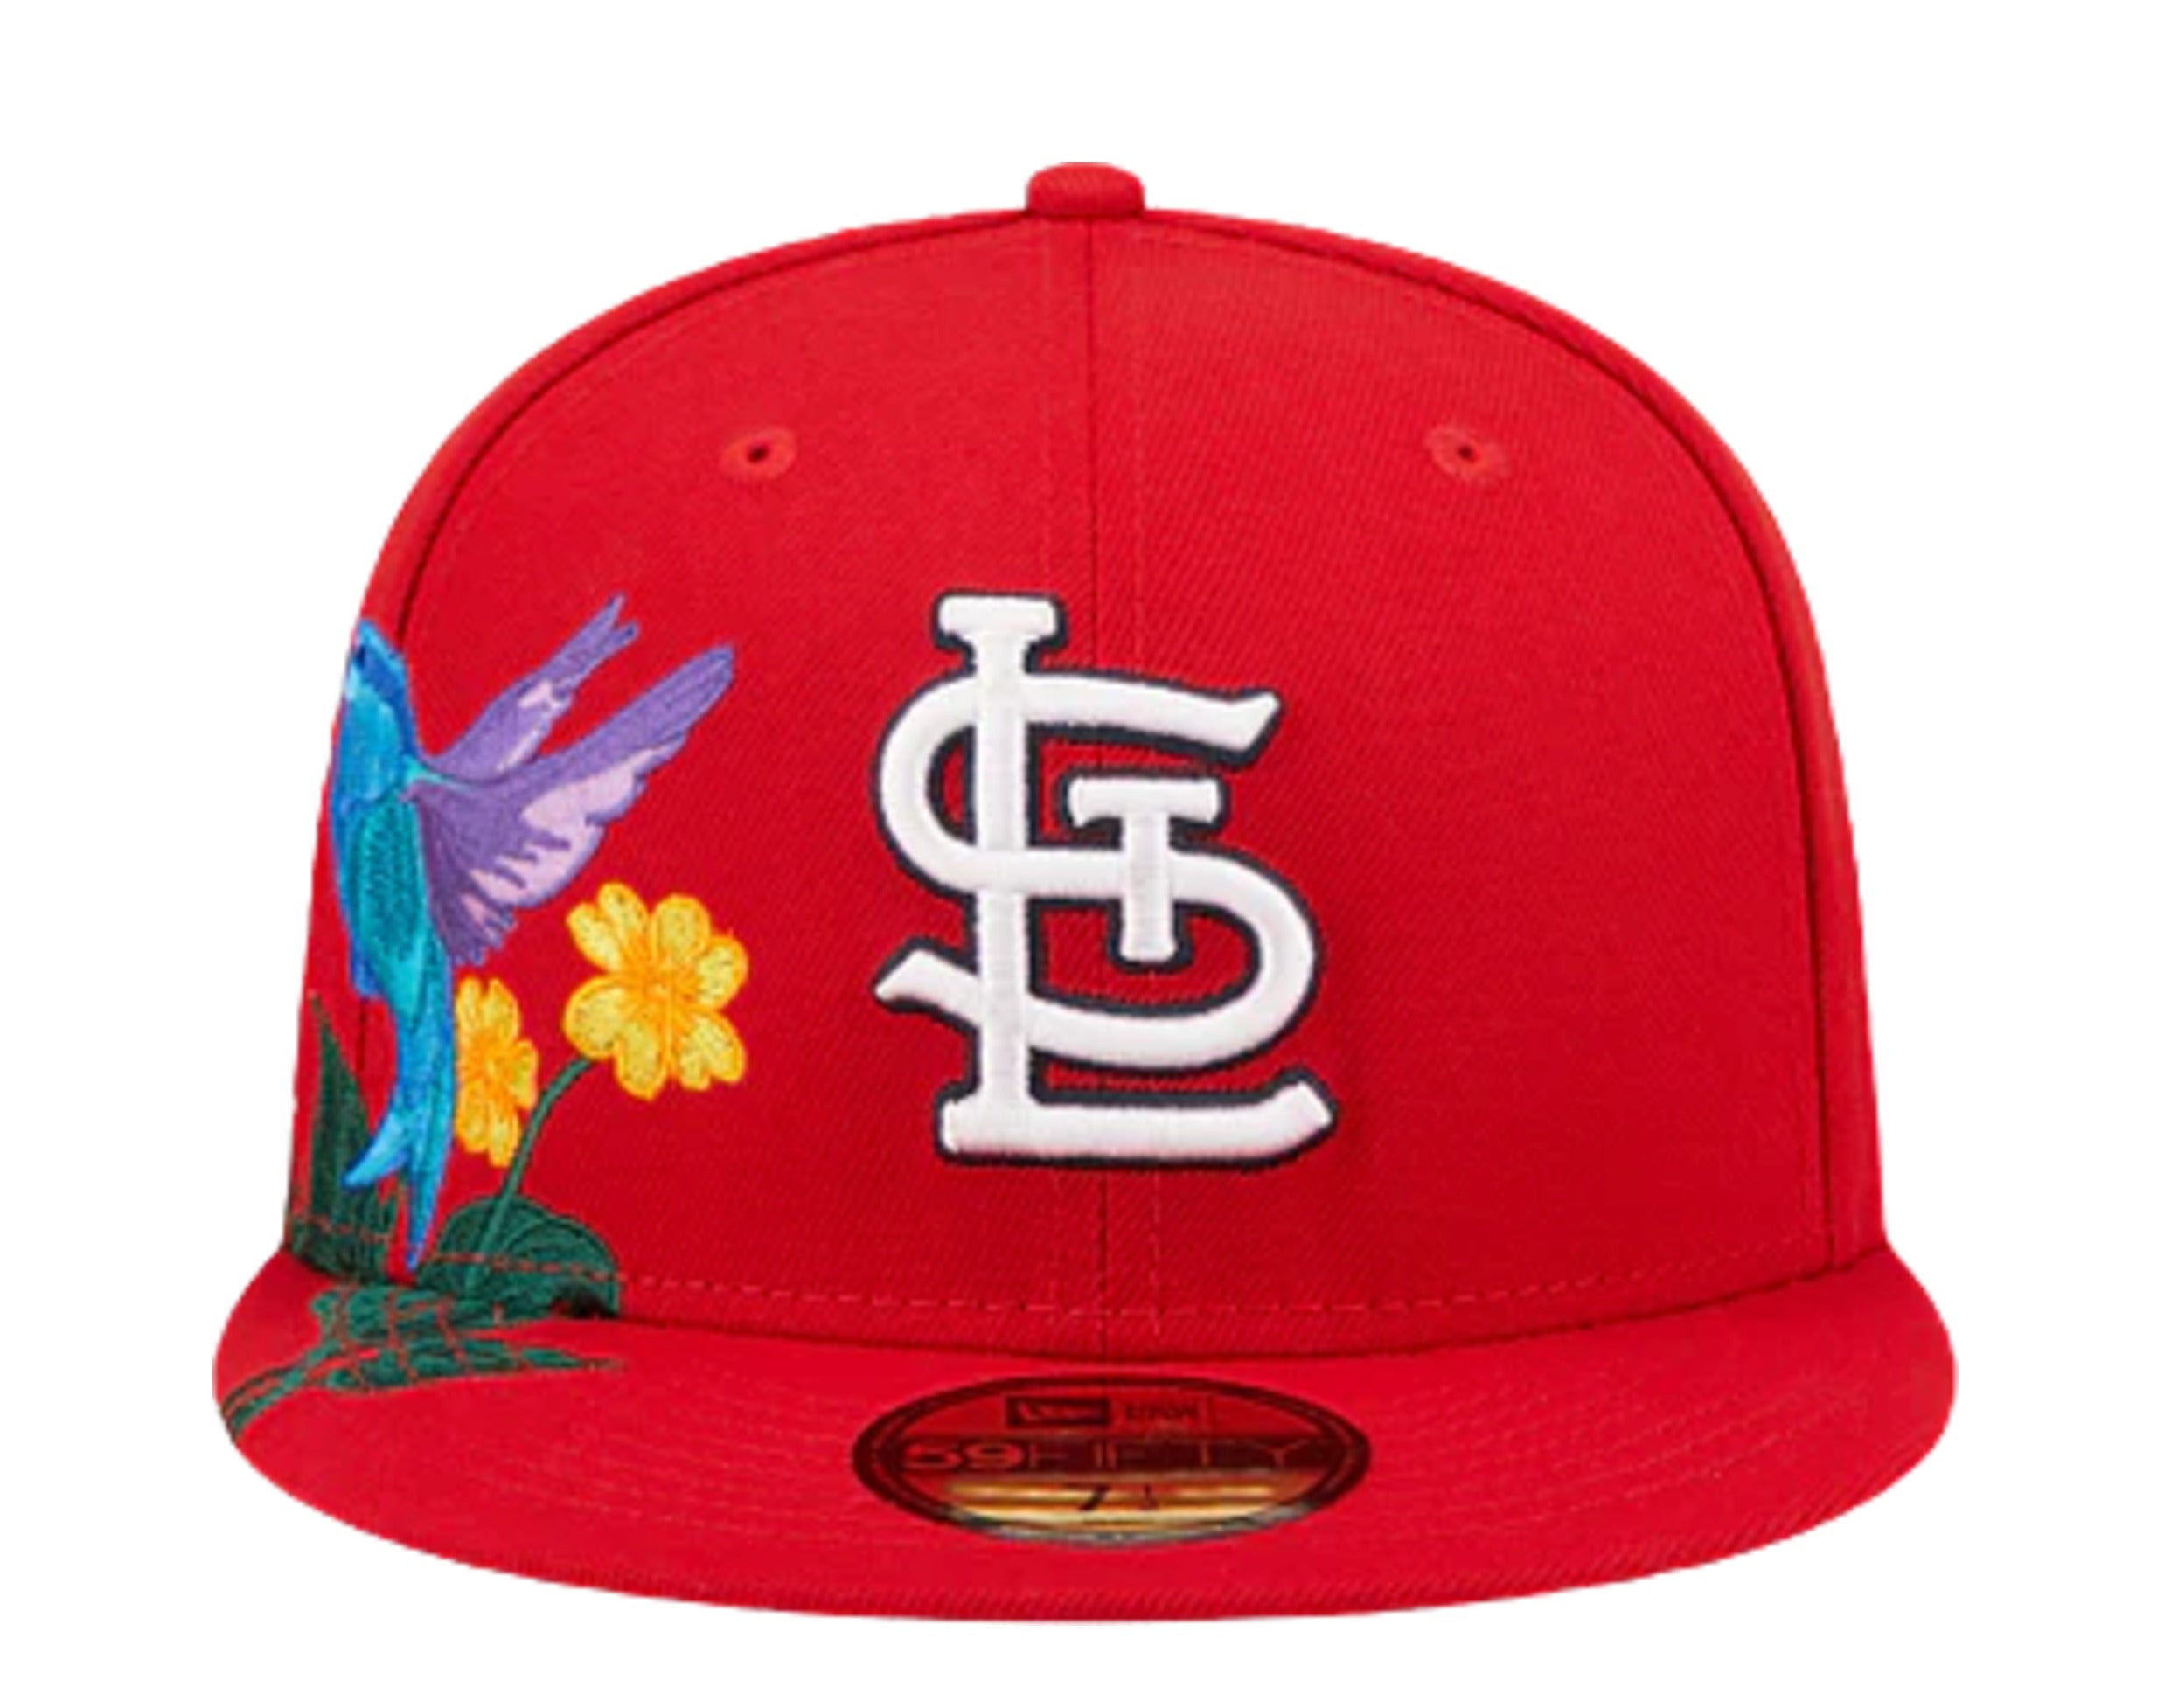 New Era New Era 59Fifty St Louis Cardinals Fitted Hat ACPERF STLCAR GM